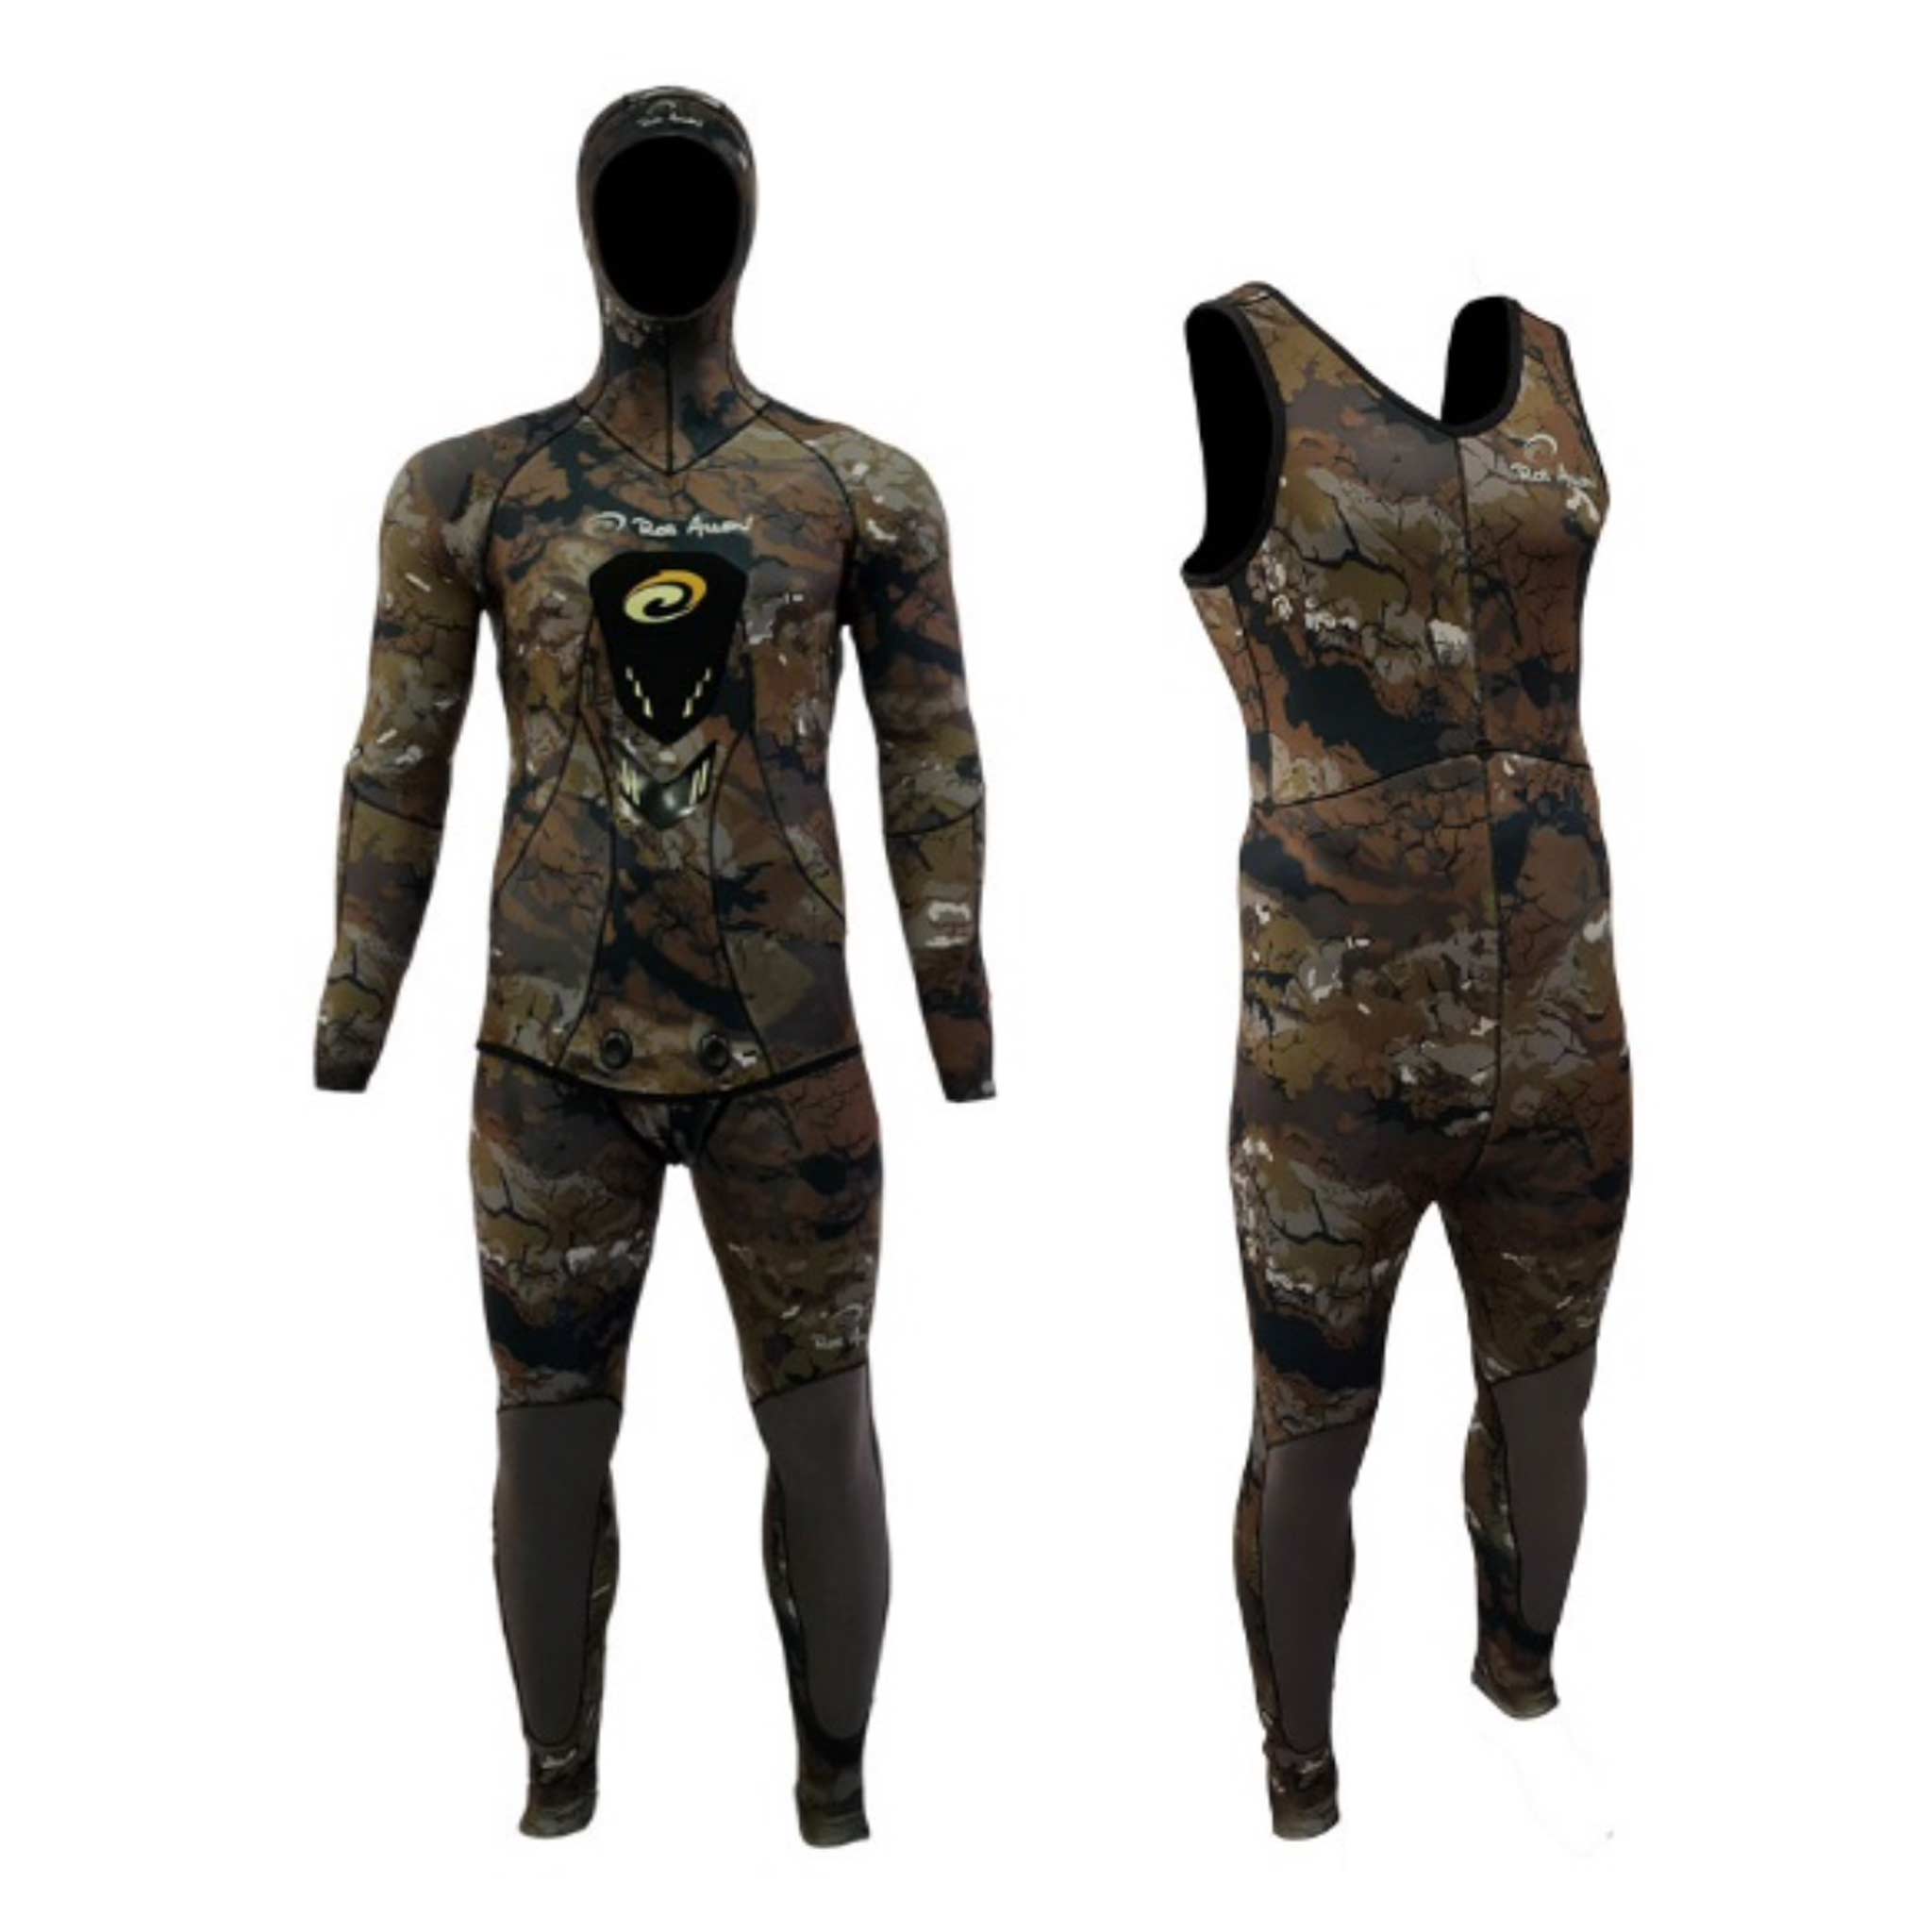 NEW 3mm Men Spearfishing Wetsuit Camouflage Neoprene TOP/PANTS Diving Suit  For Scuba Free Diving Jumpsuit Cold Water Swimsuit